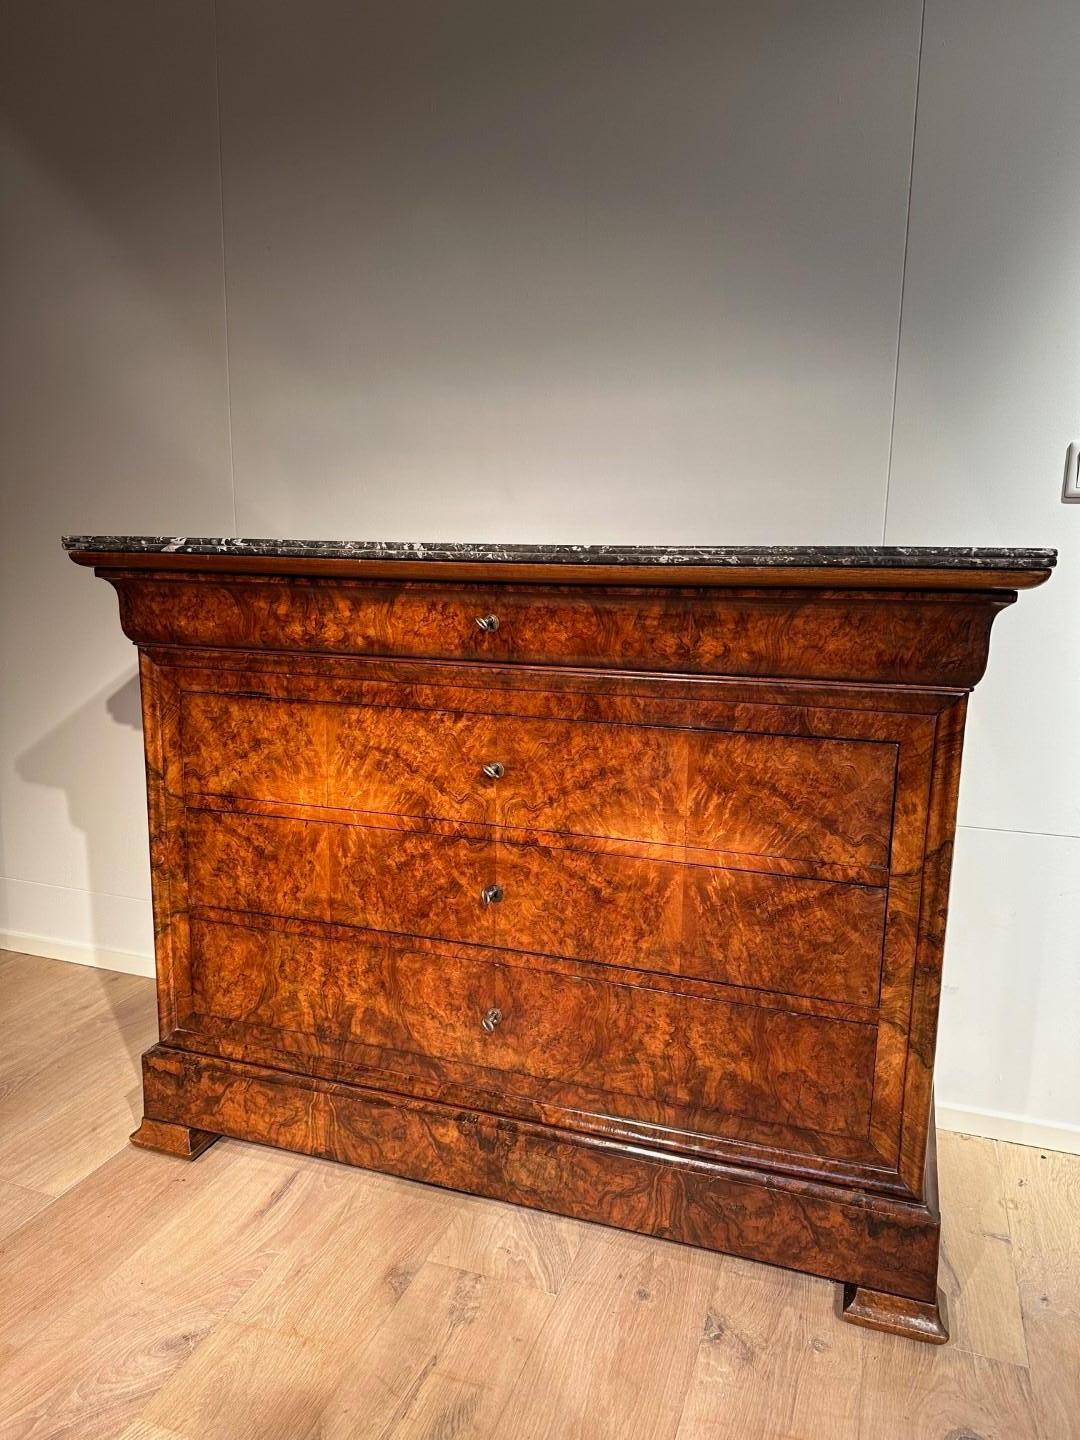 Impressive antique Louis Philippe walnut chest of drawers with marble top. Completely in perfect condition. The cabinet is completely laid out in pattern at the front. The walnut wood has a beautiful grain and color. There are 5 drawers in it. The